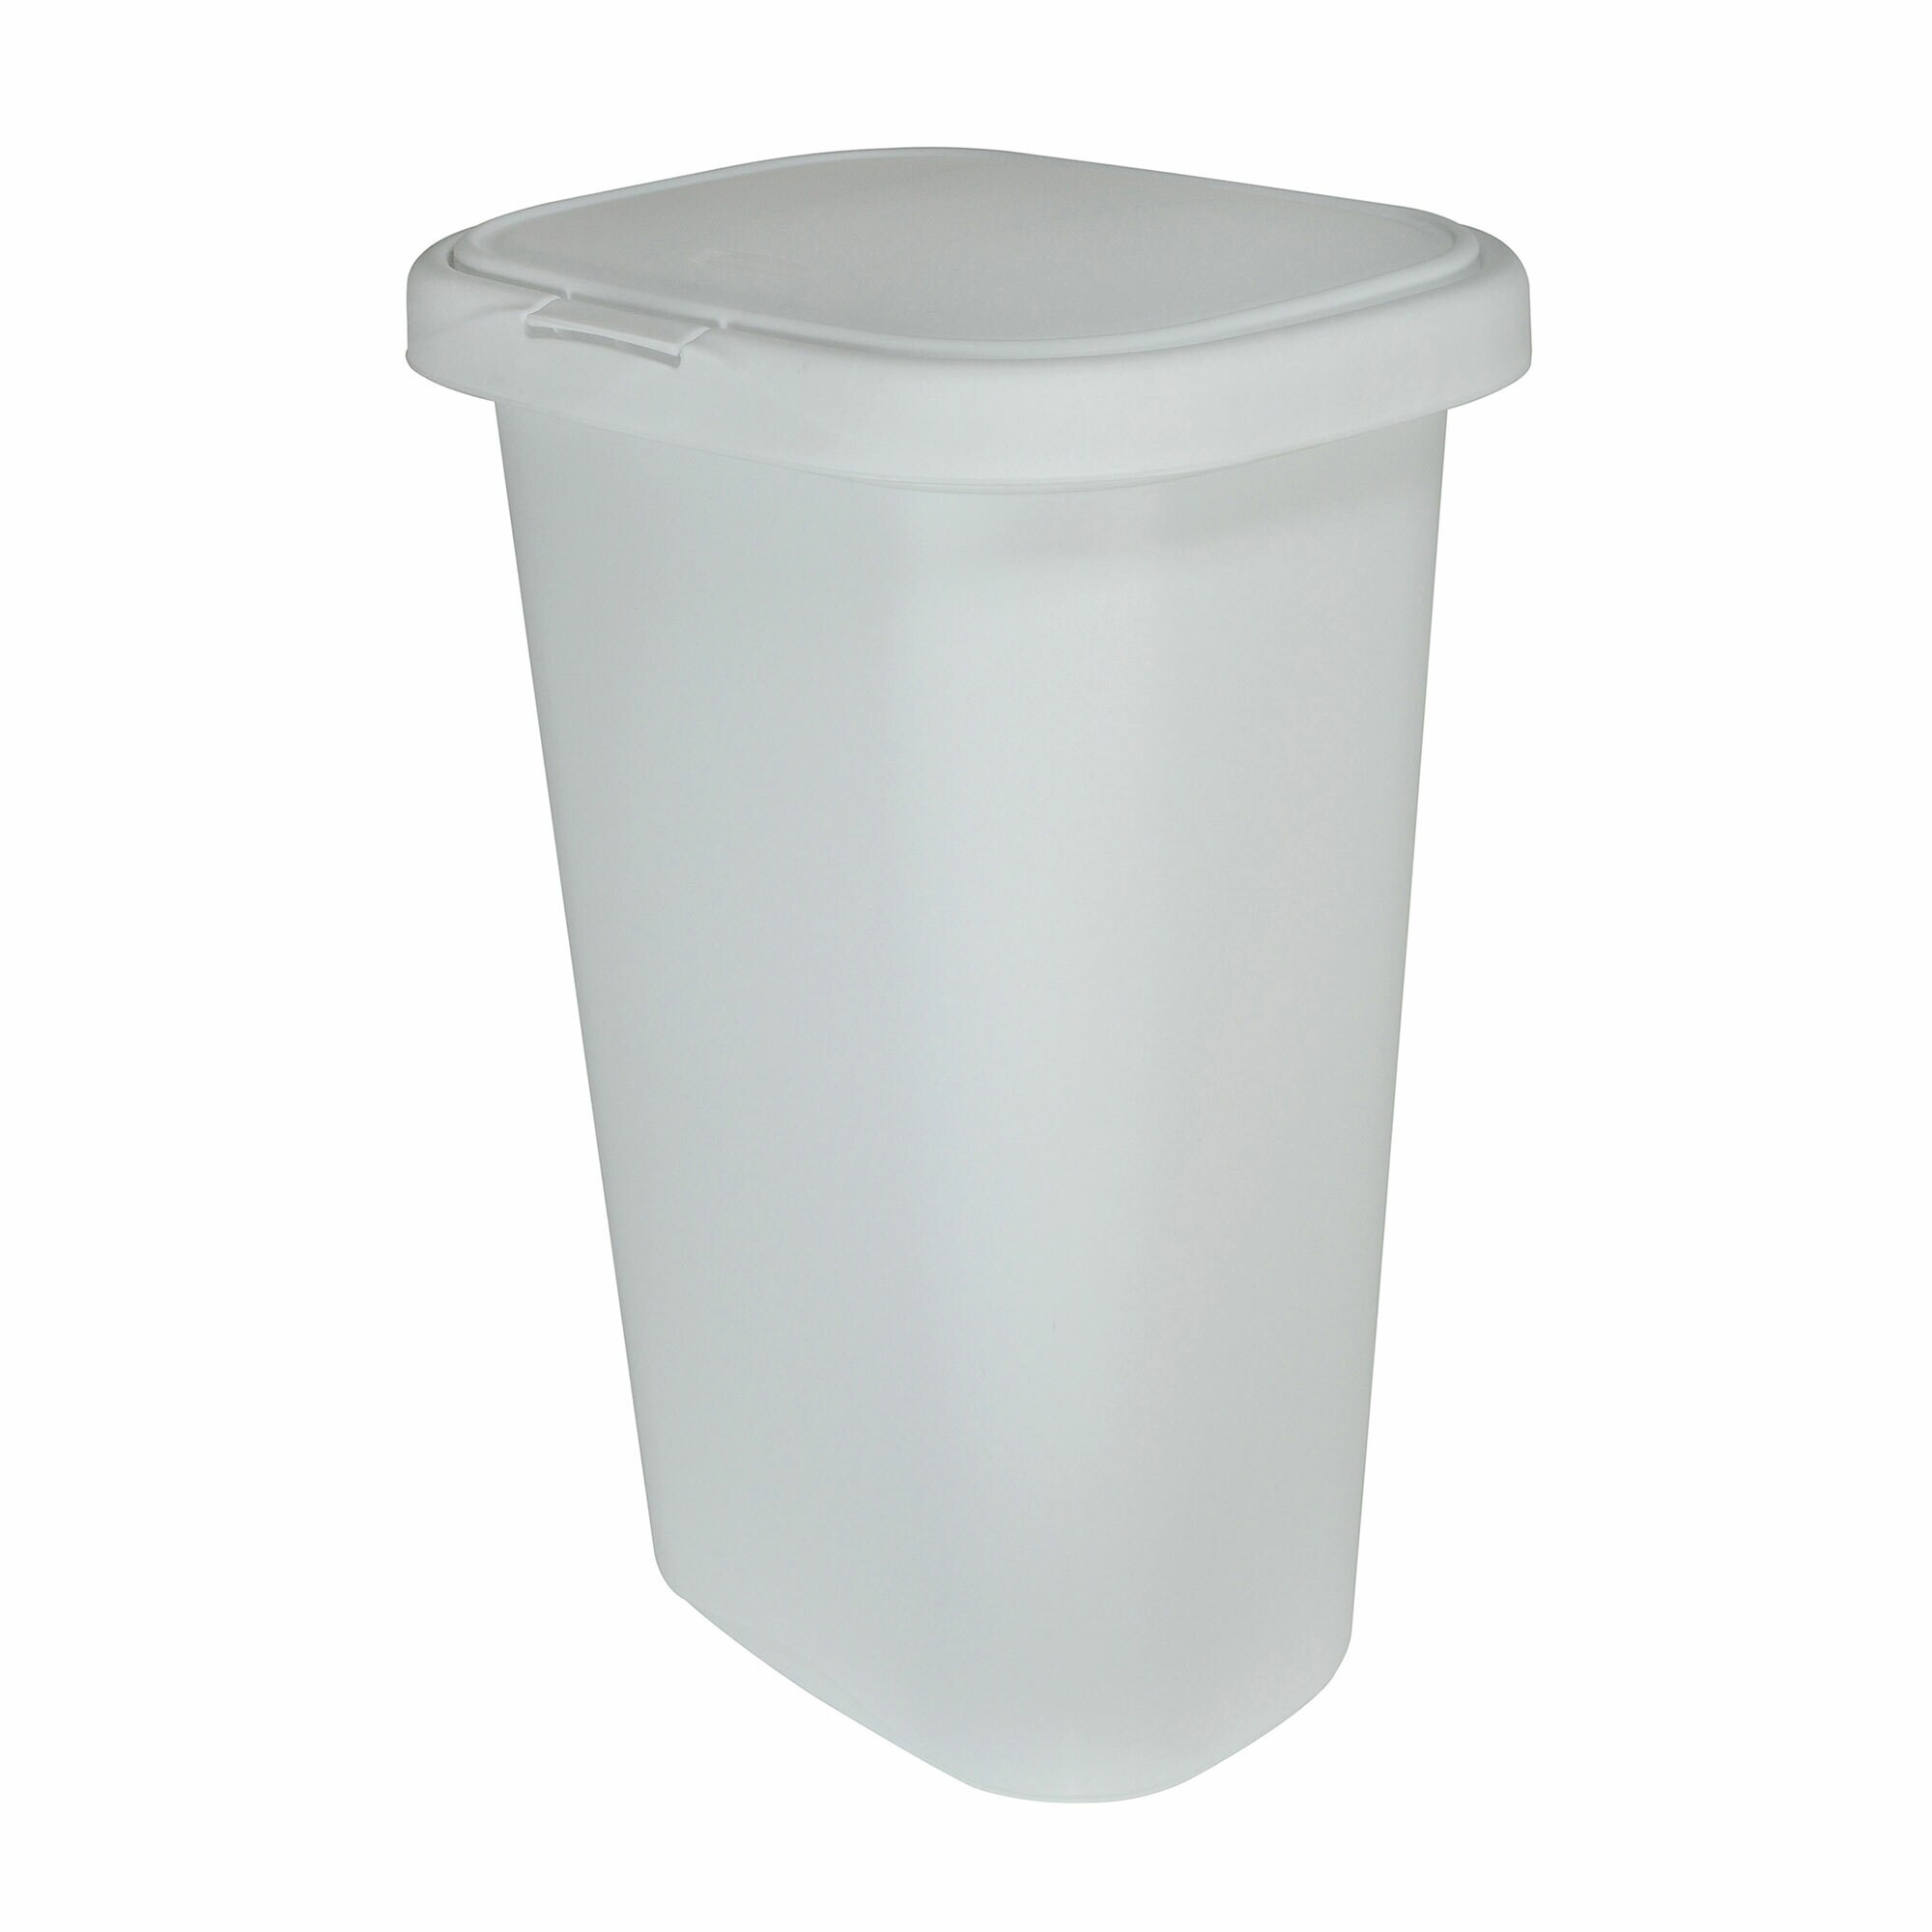 Kitchen Trash Can 13 Gallon Trash Can with Lid-Garbage Can Kitchen